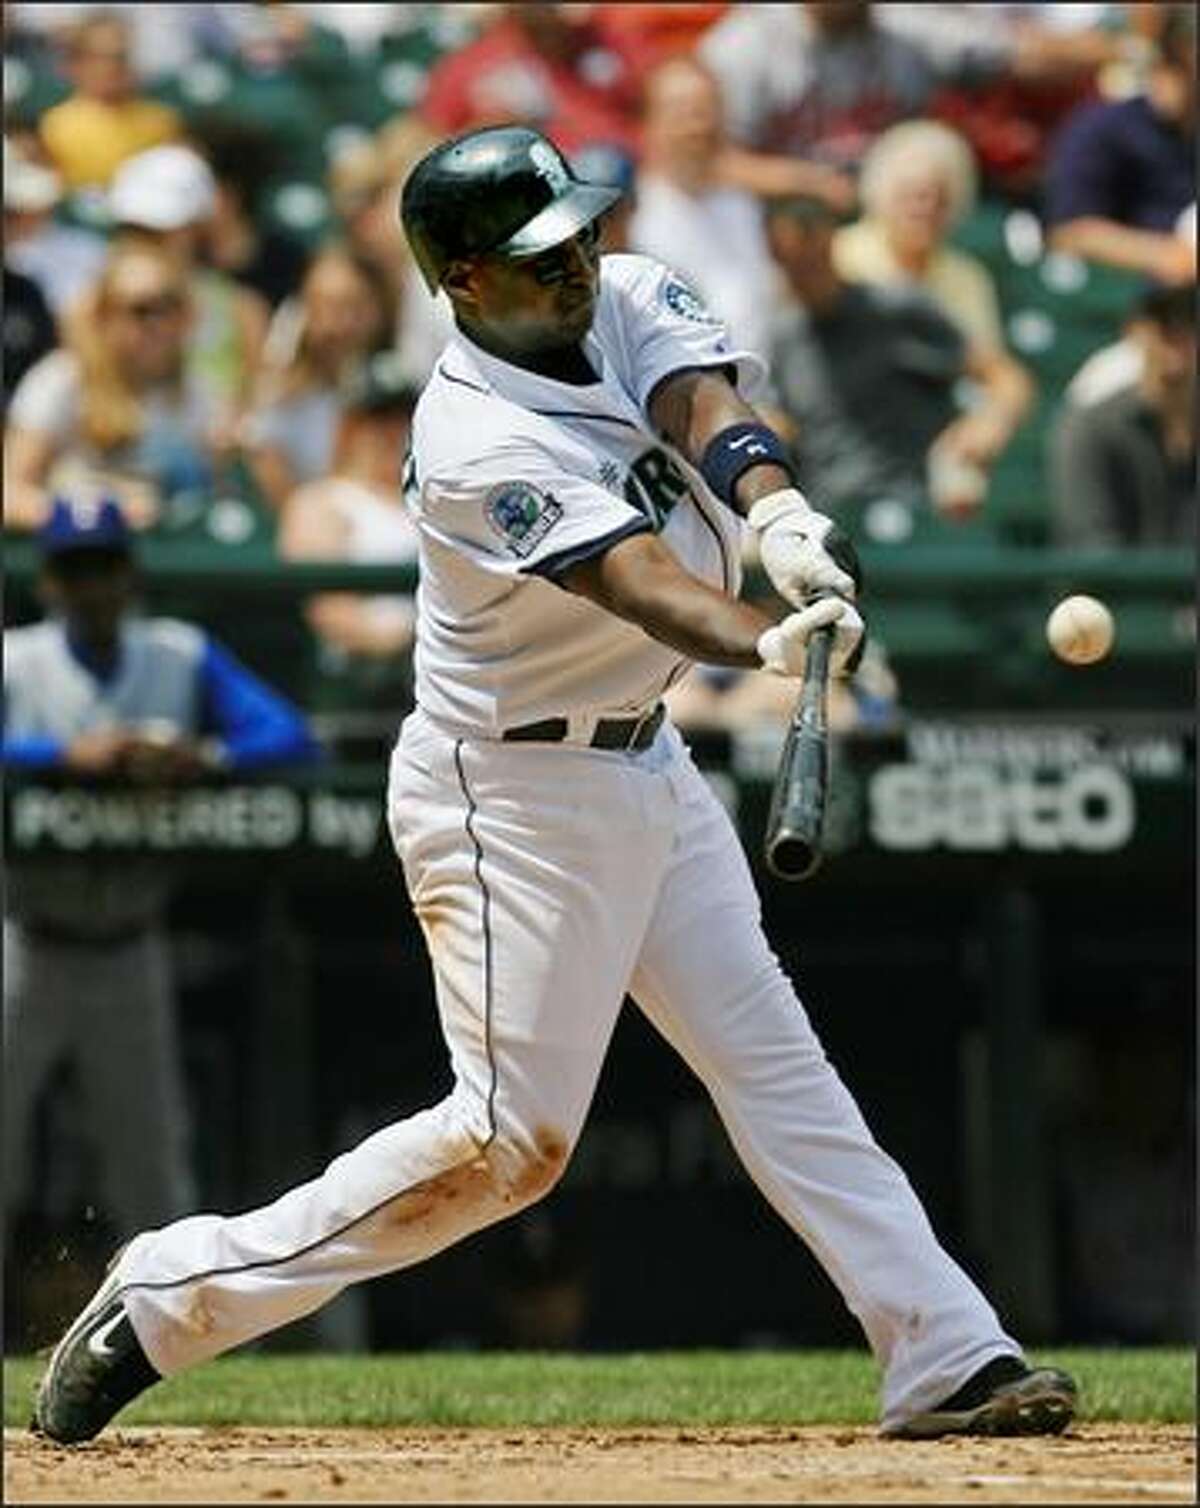 Seattle Mariners' Yuniesky Betancourt doubles off Texas Rangers starter Robinson Tejeda to extend his hitting streak to 15 games during the 2nd inning.